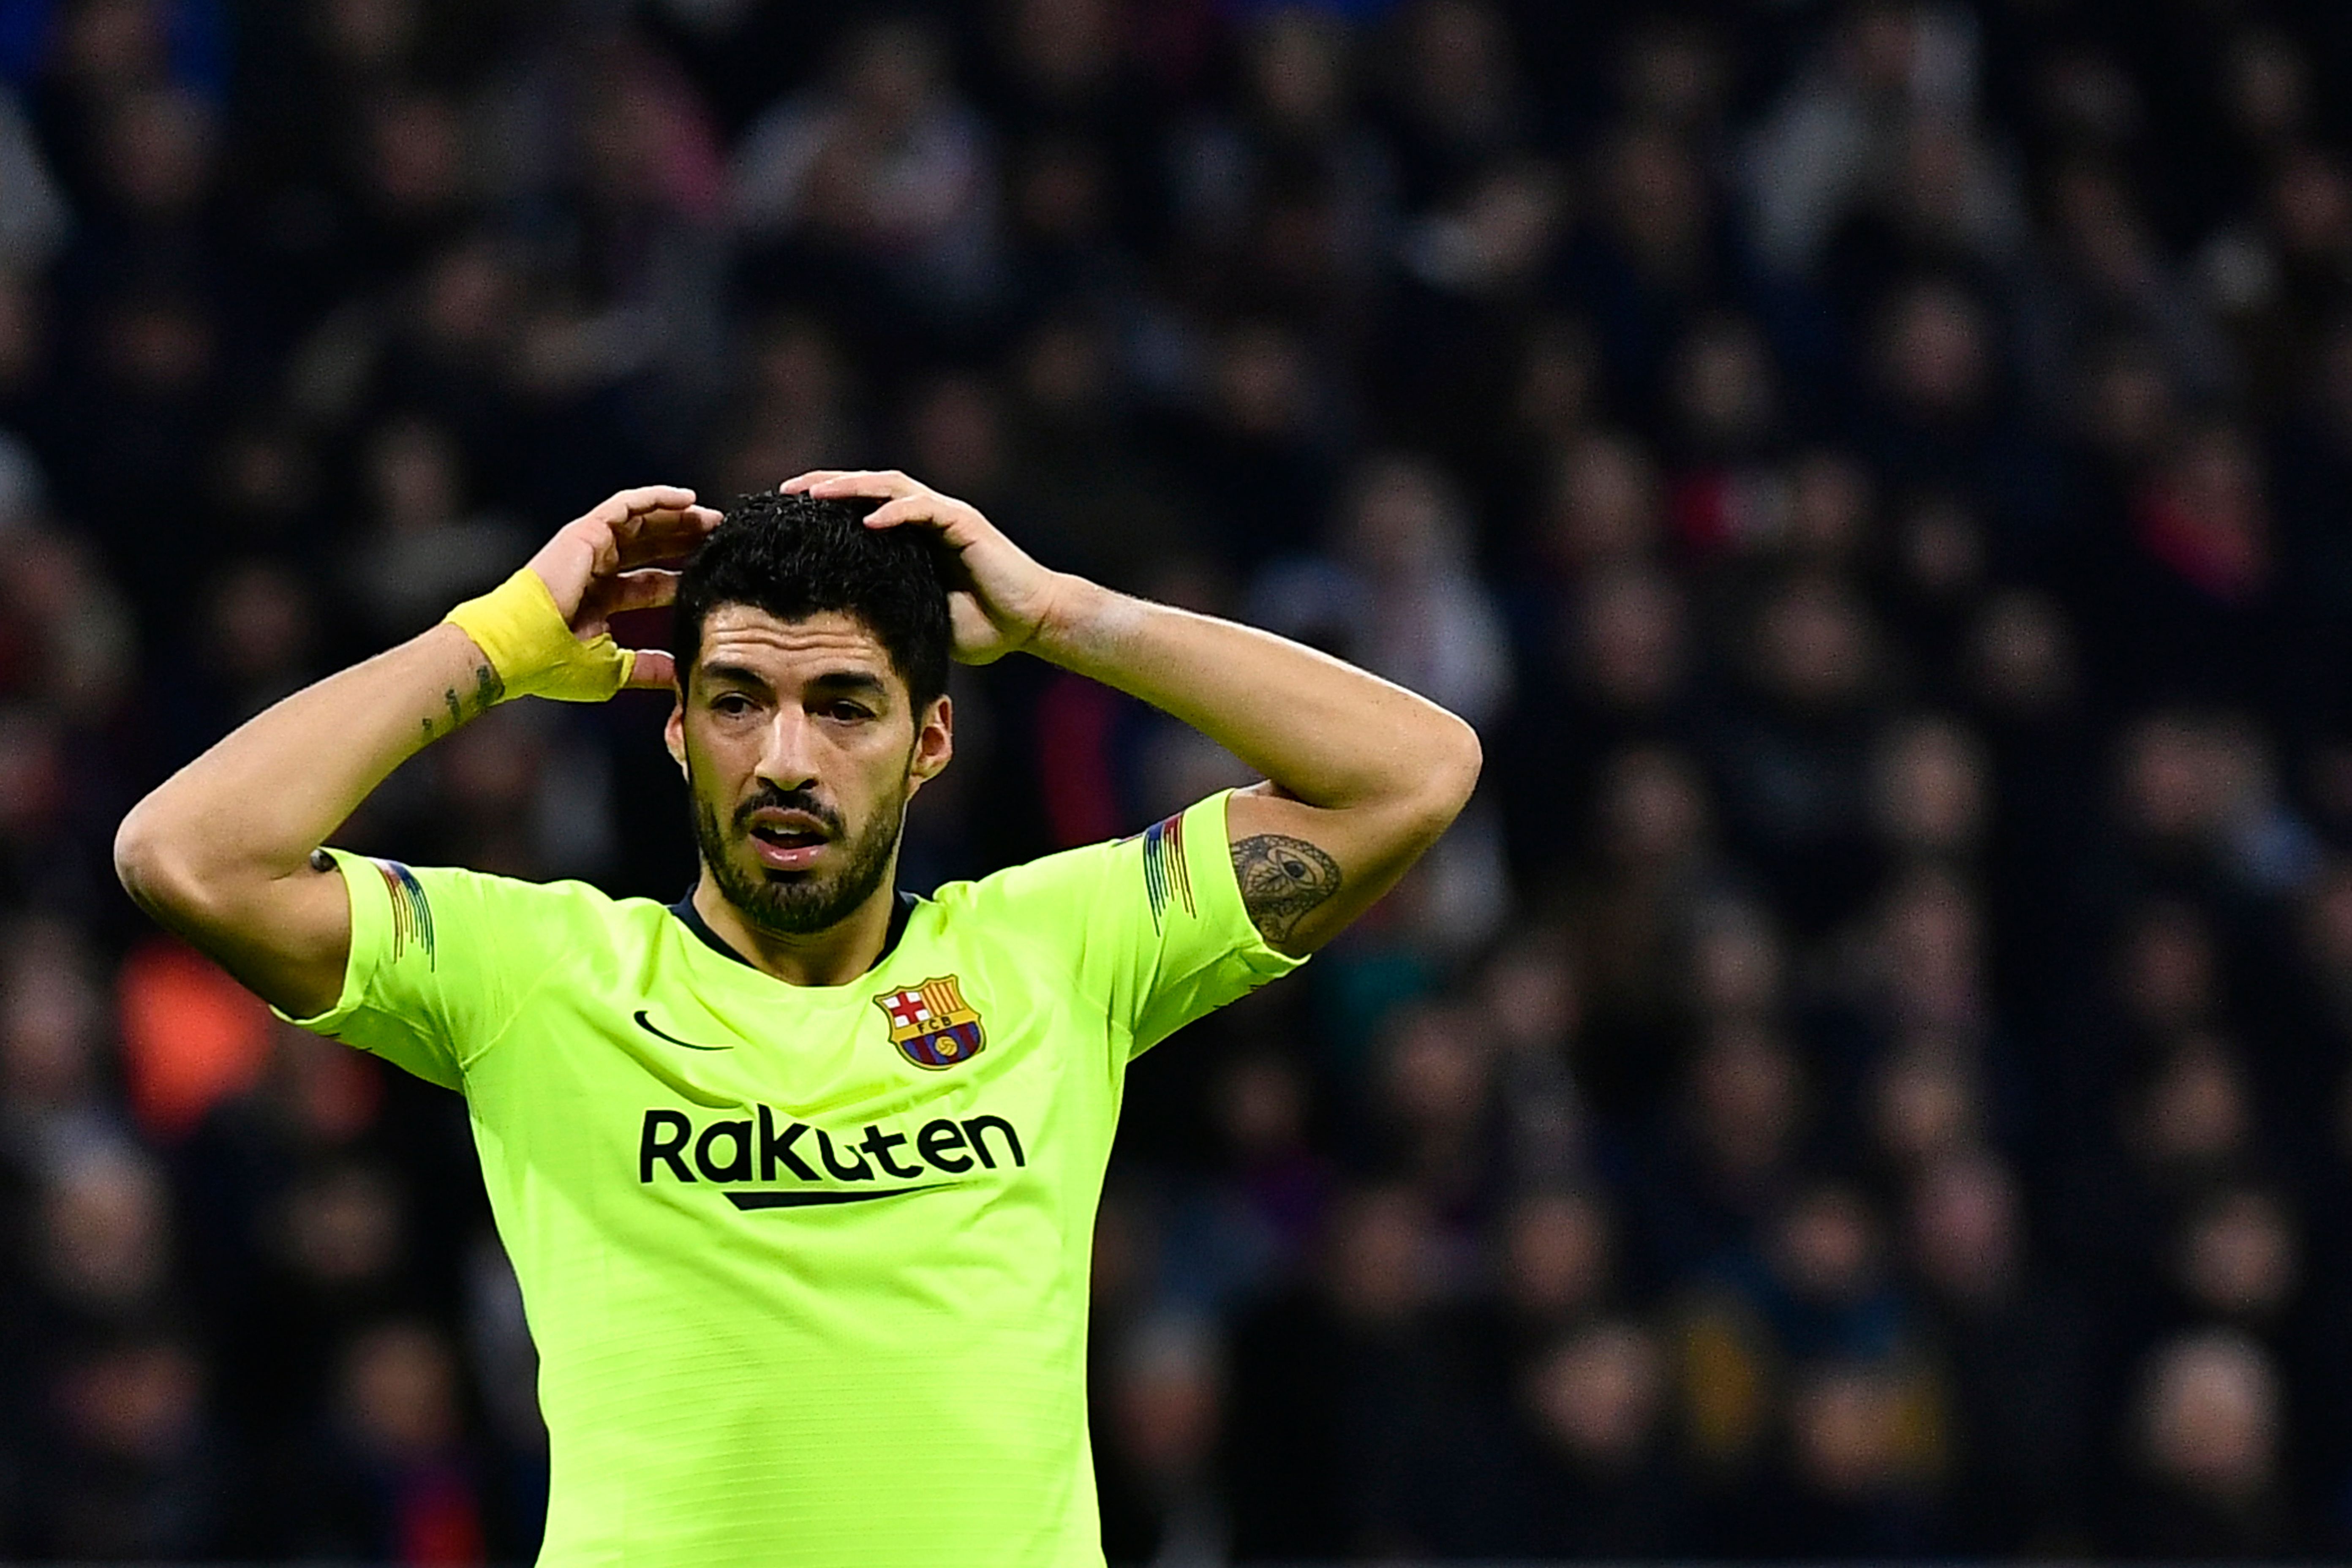 Barcelona's Uruguayan forward Luis Suarez reacts during the UEFA Champions League round of 16 first leg football match between Lyon (OL) and FC Barcelona on February 19, 2019, at the Groupama Stadium in Decines-Charpieu, central-eastern France. (Photo by JEFF PACHOUD / AFP)        (Photo credit should read JEFF PACHOUD/AFP/Getty Images)